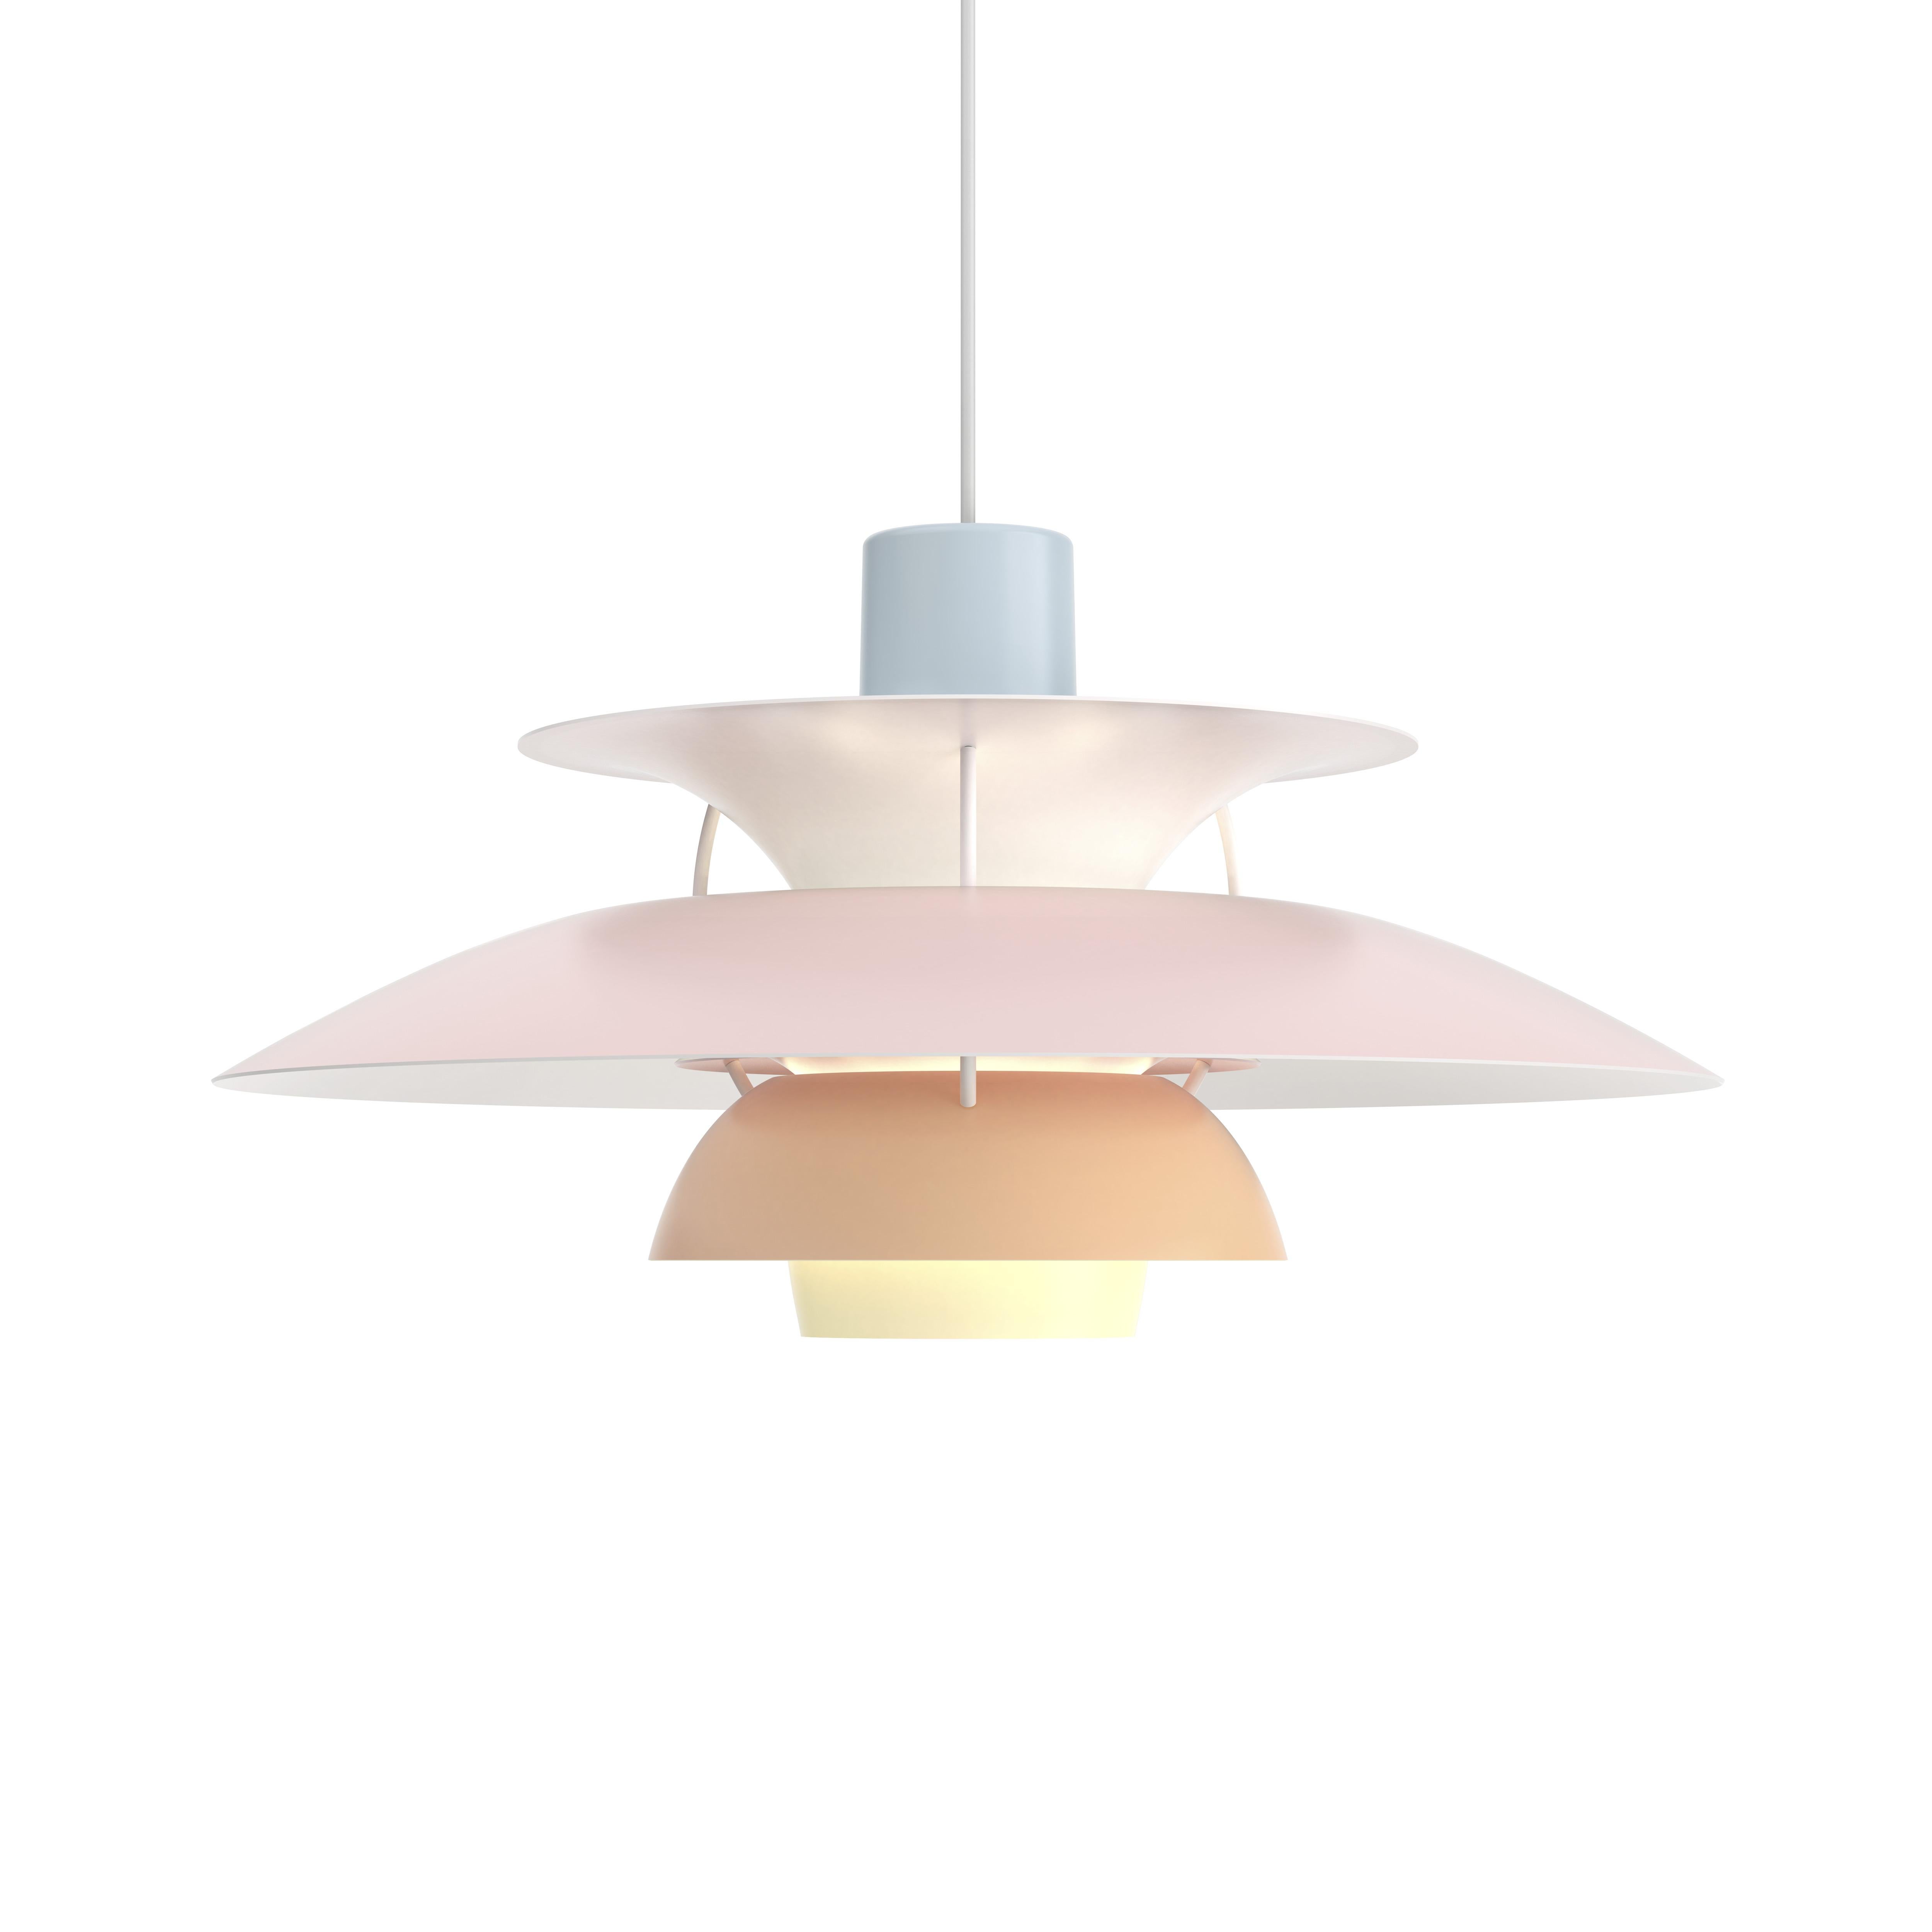 Poul Henningsen developed the PH 5 in 1958 in response to constant changes made to the shape and size of incandescent bulbs by bulb manufacturers, naming it after the size of the pendant’s main shade, which is 50 cm in diameter. When the lamp was